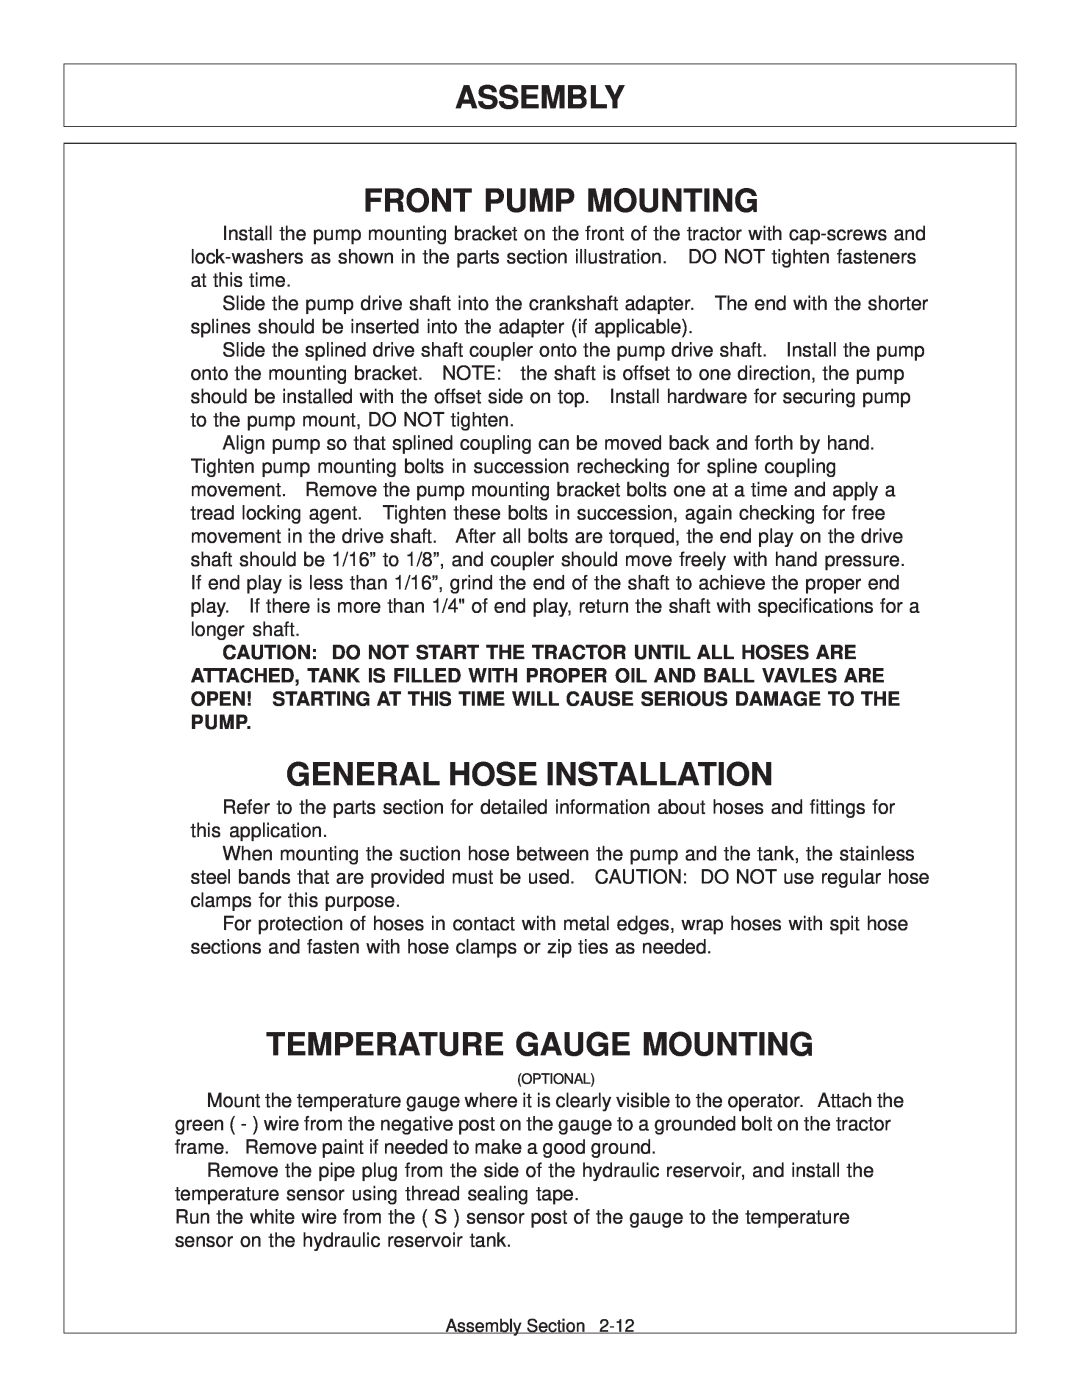 Tiger Products Co., Ltd 6020009 manual Front Pump Mounting, General Hose Installation, Temperature Gauge Mounting, Assembly 